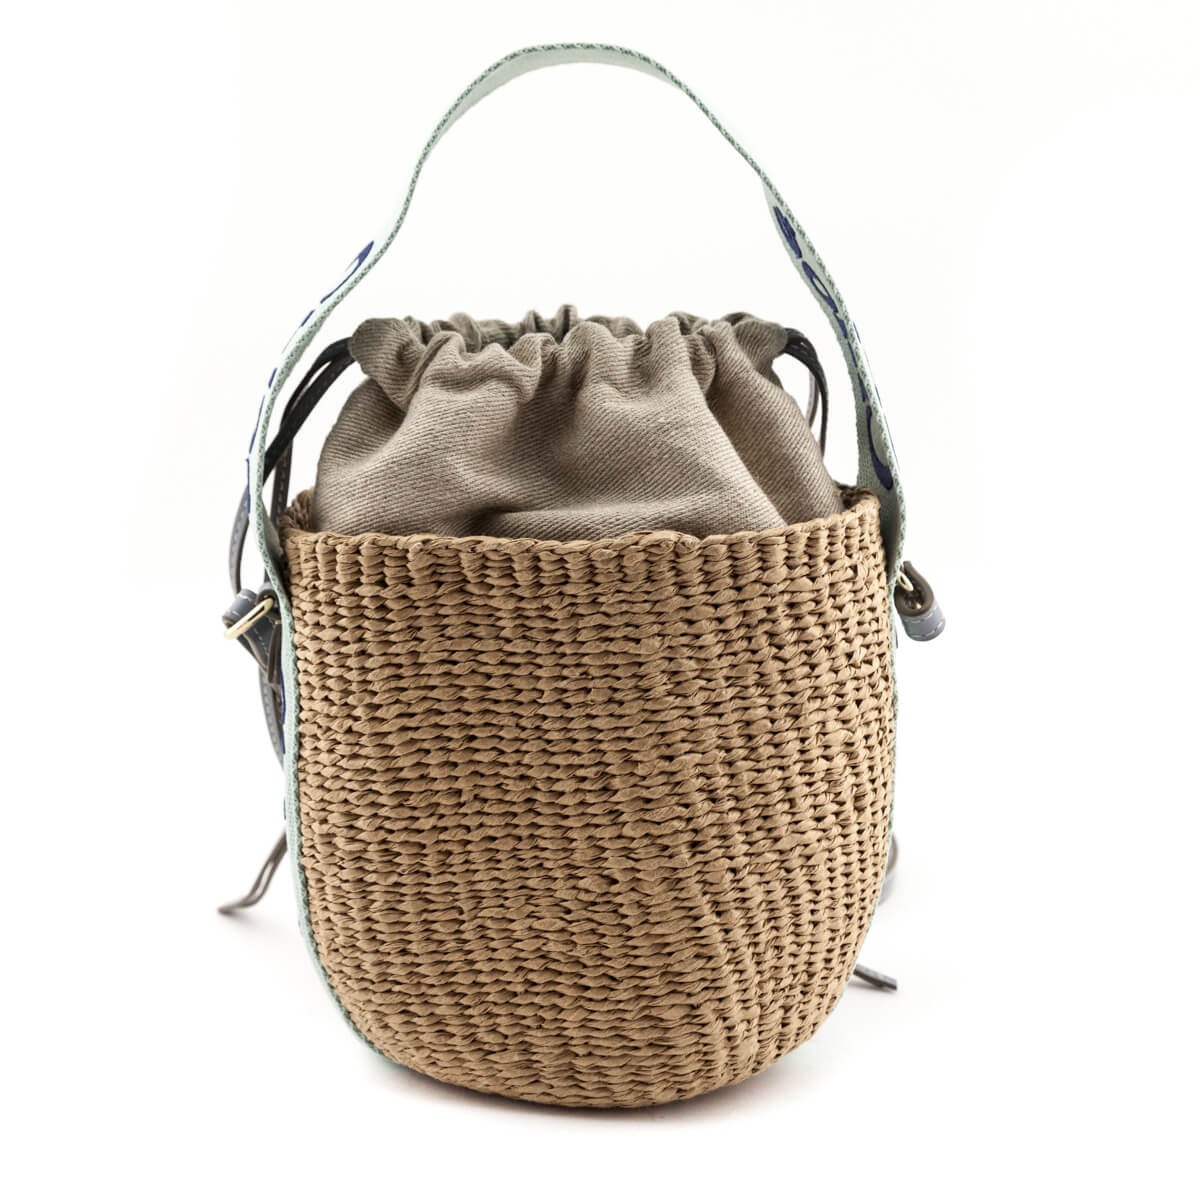 Chloe Blue-Green Natural Woven Fiber Small Woody Basket Bag - Love that Bag etc - Preowned Authentic Designer Handbags & Preloved Fashions